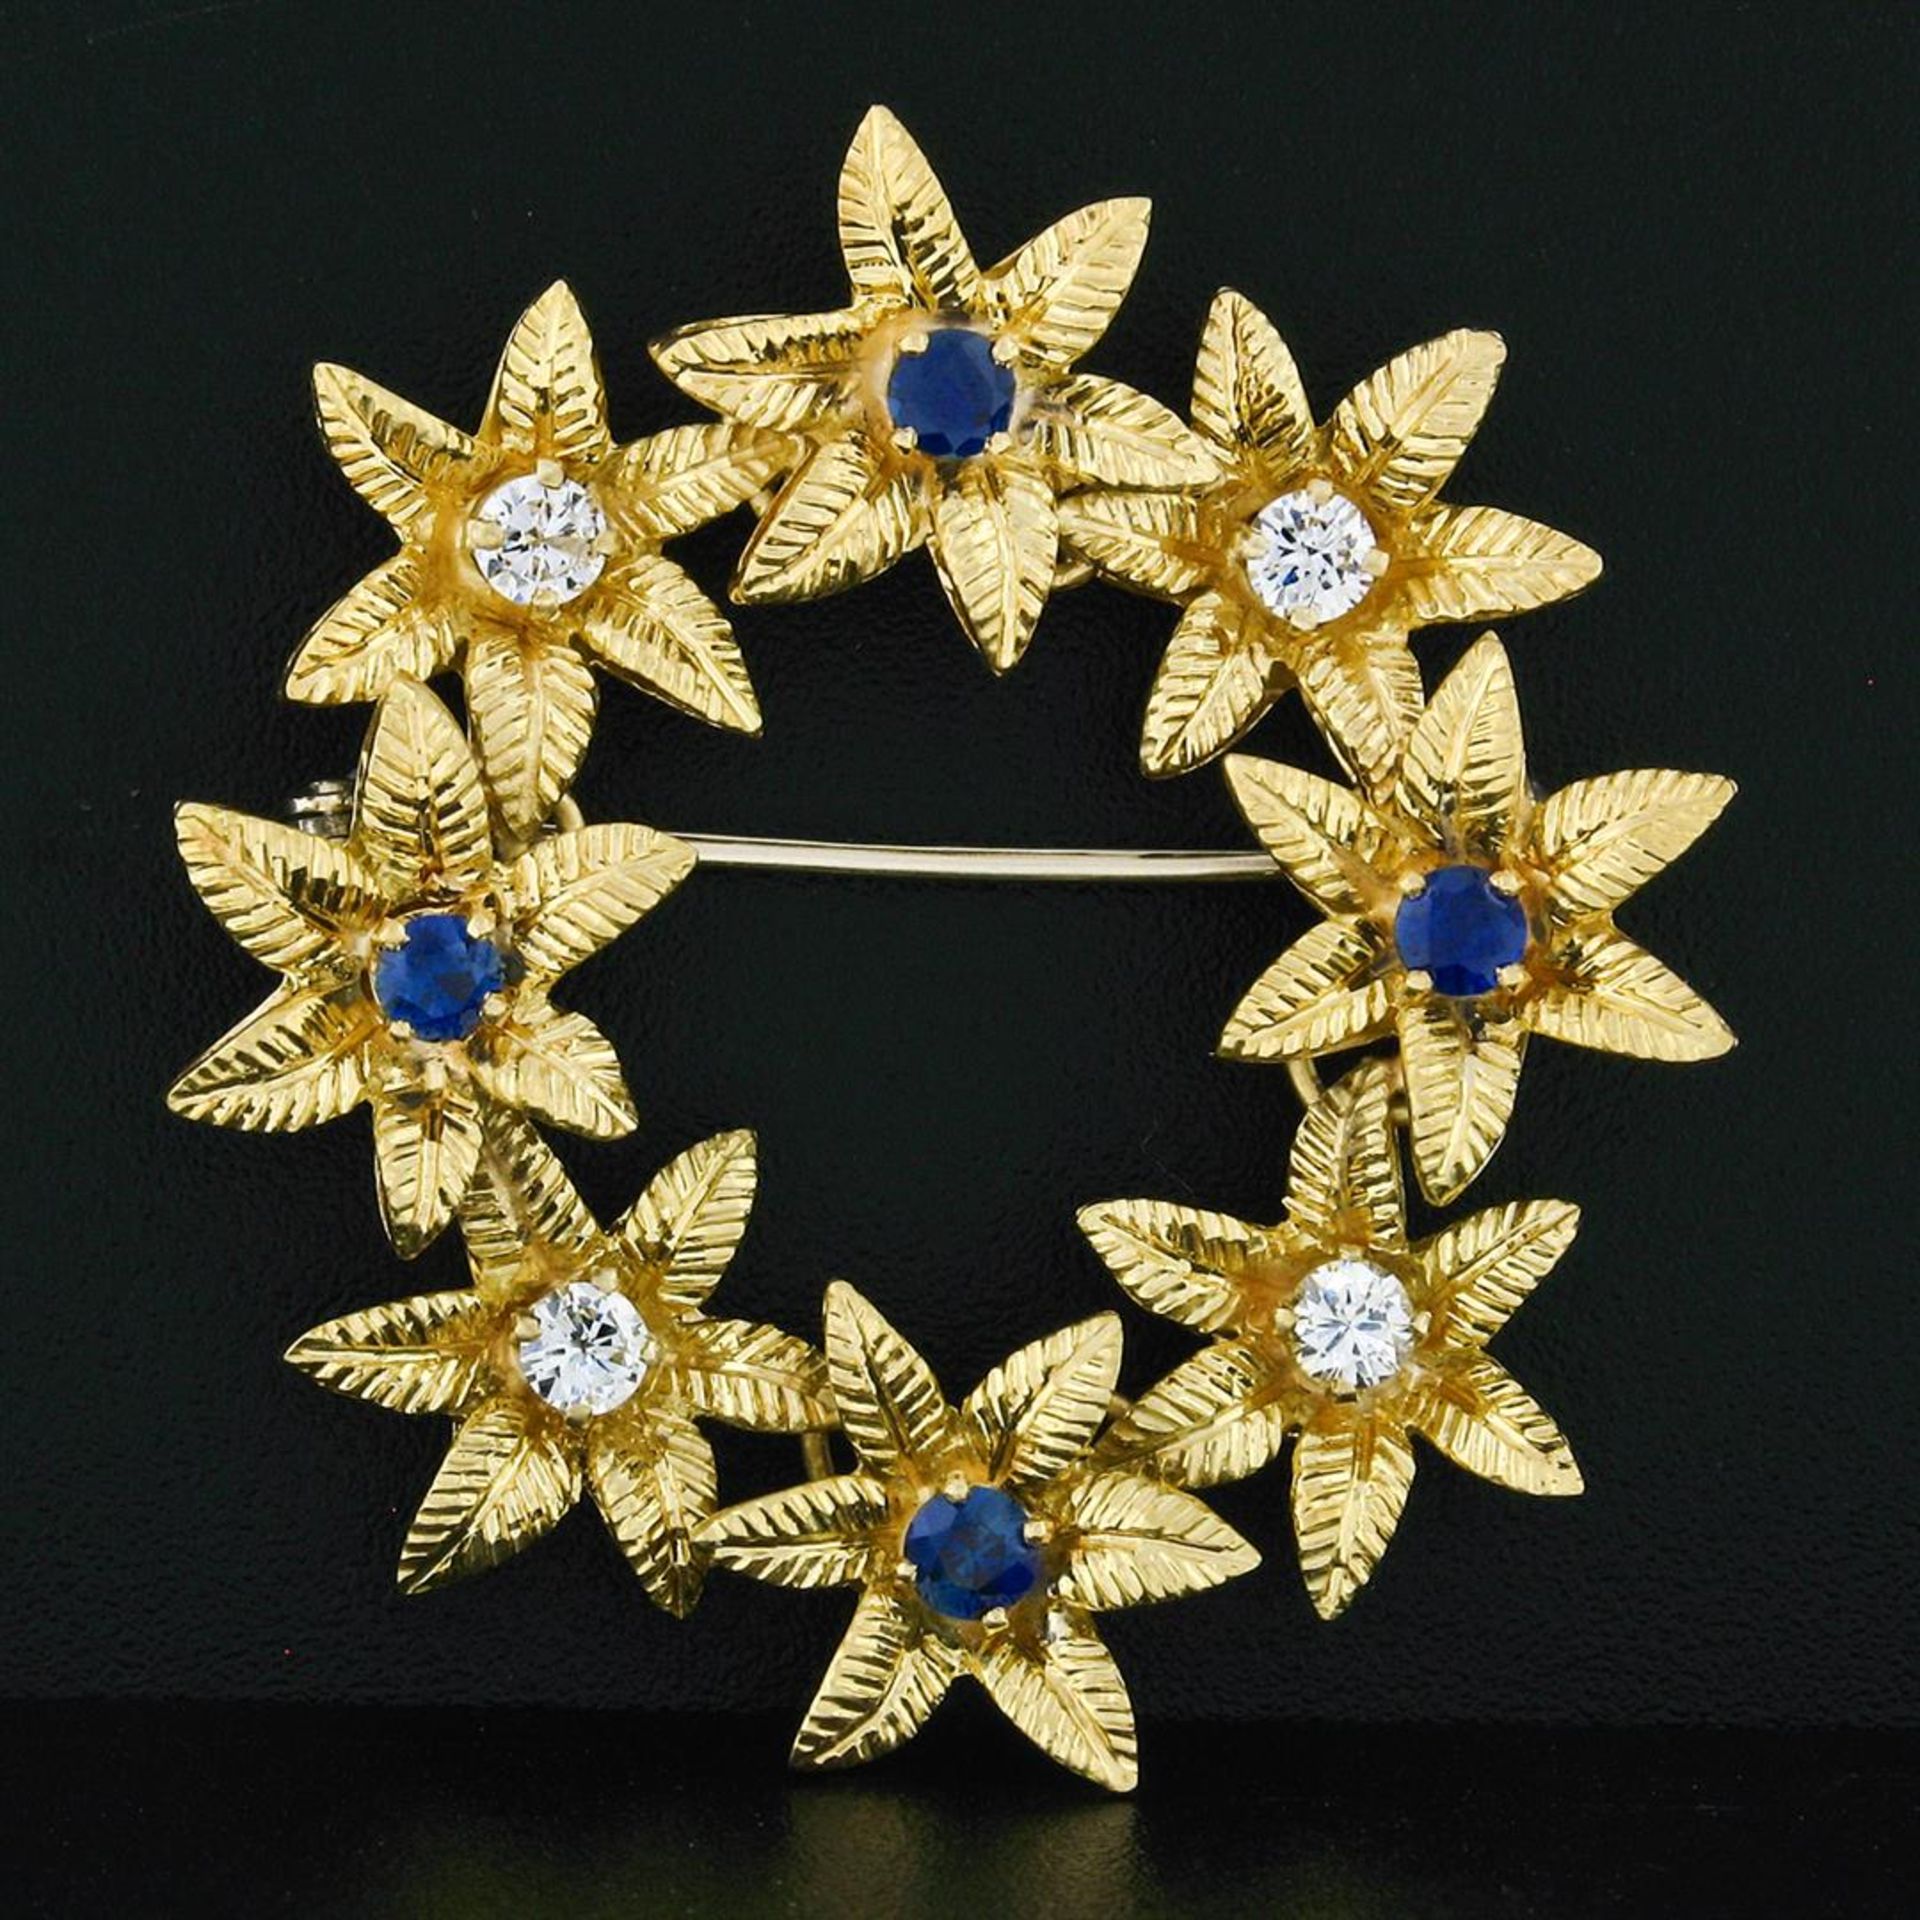 Vintage 18k Gold 1.19ct Brilliant Sapphire & Diamond Etched Flower Wreath Brooch - Image 2 of 7